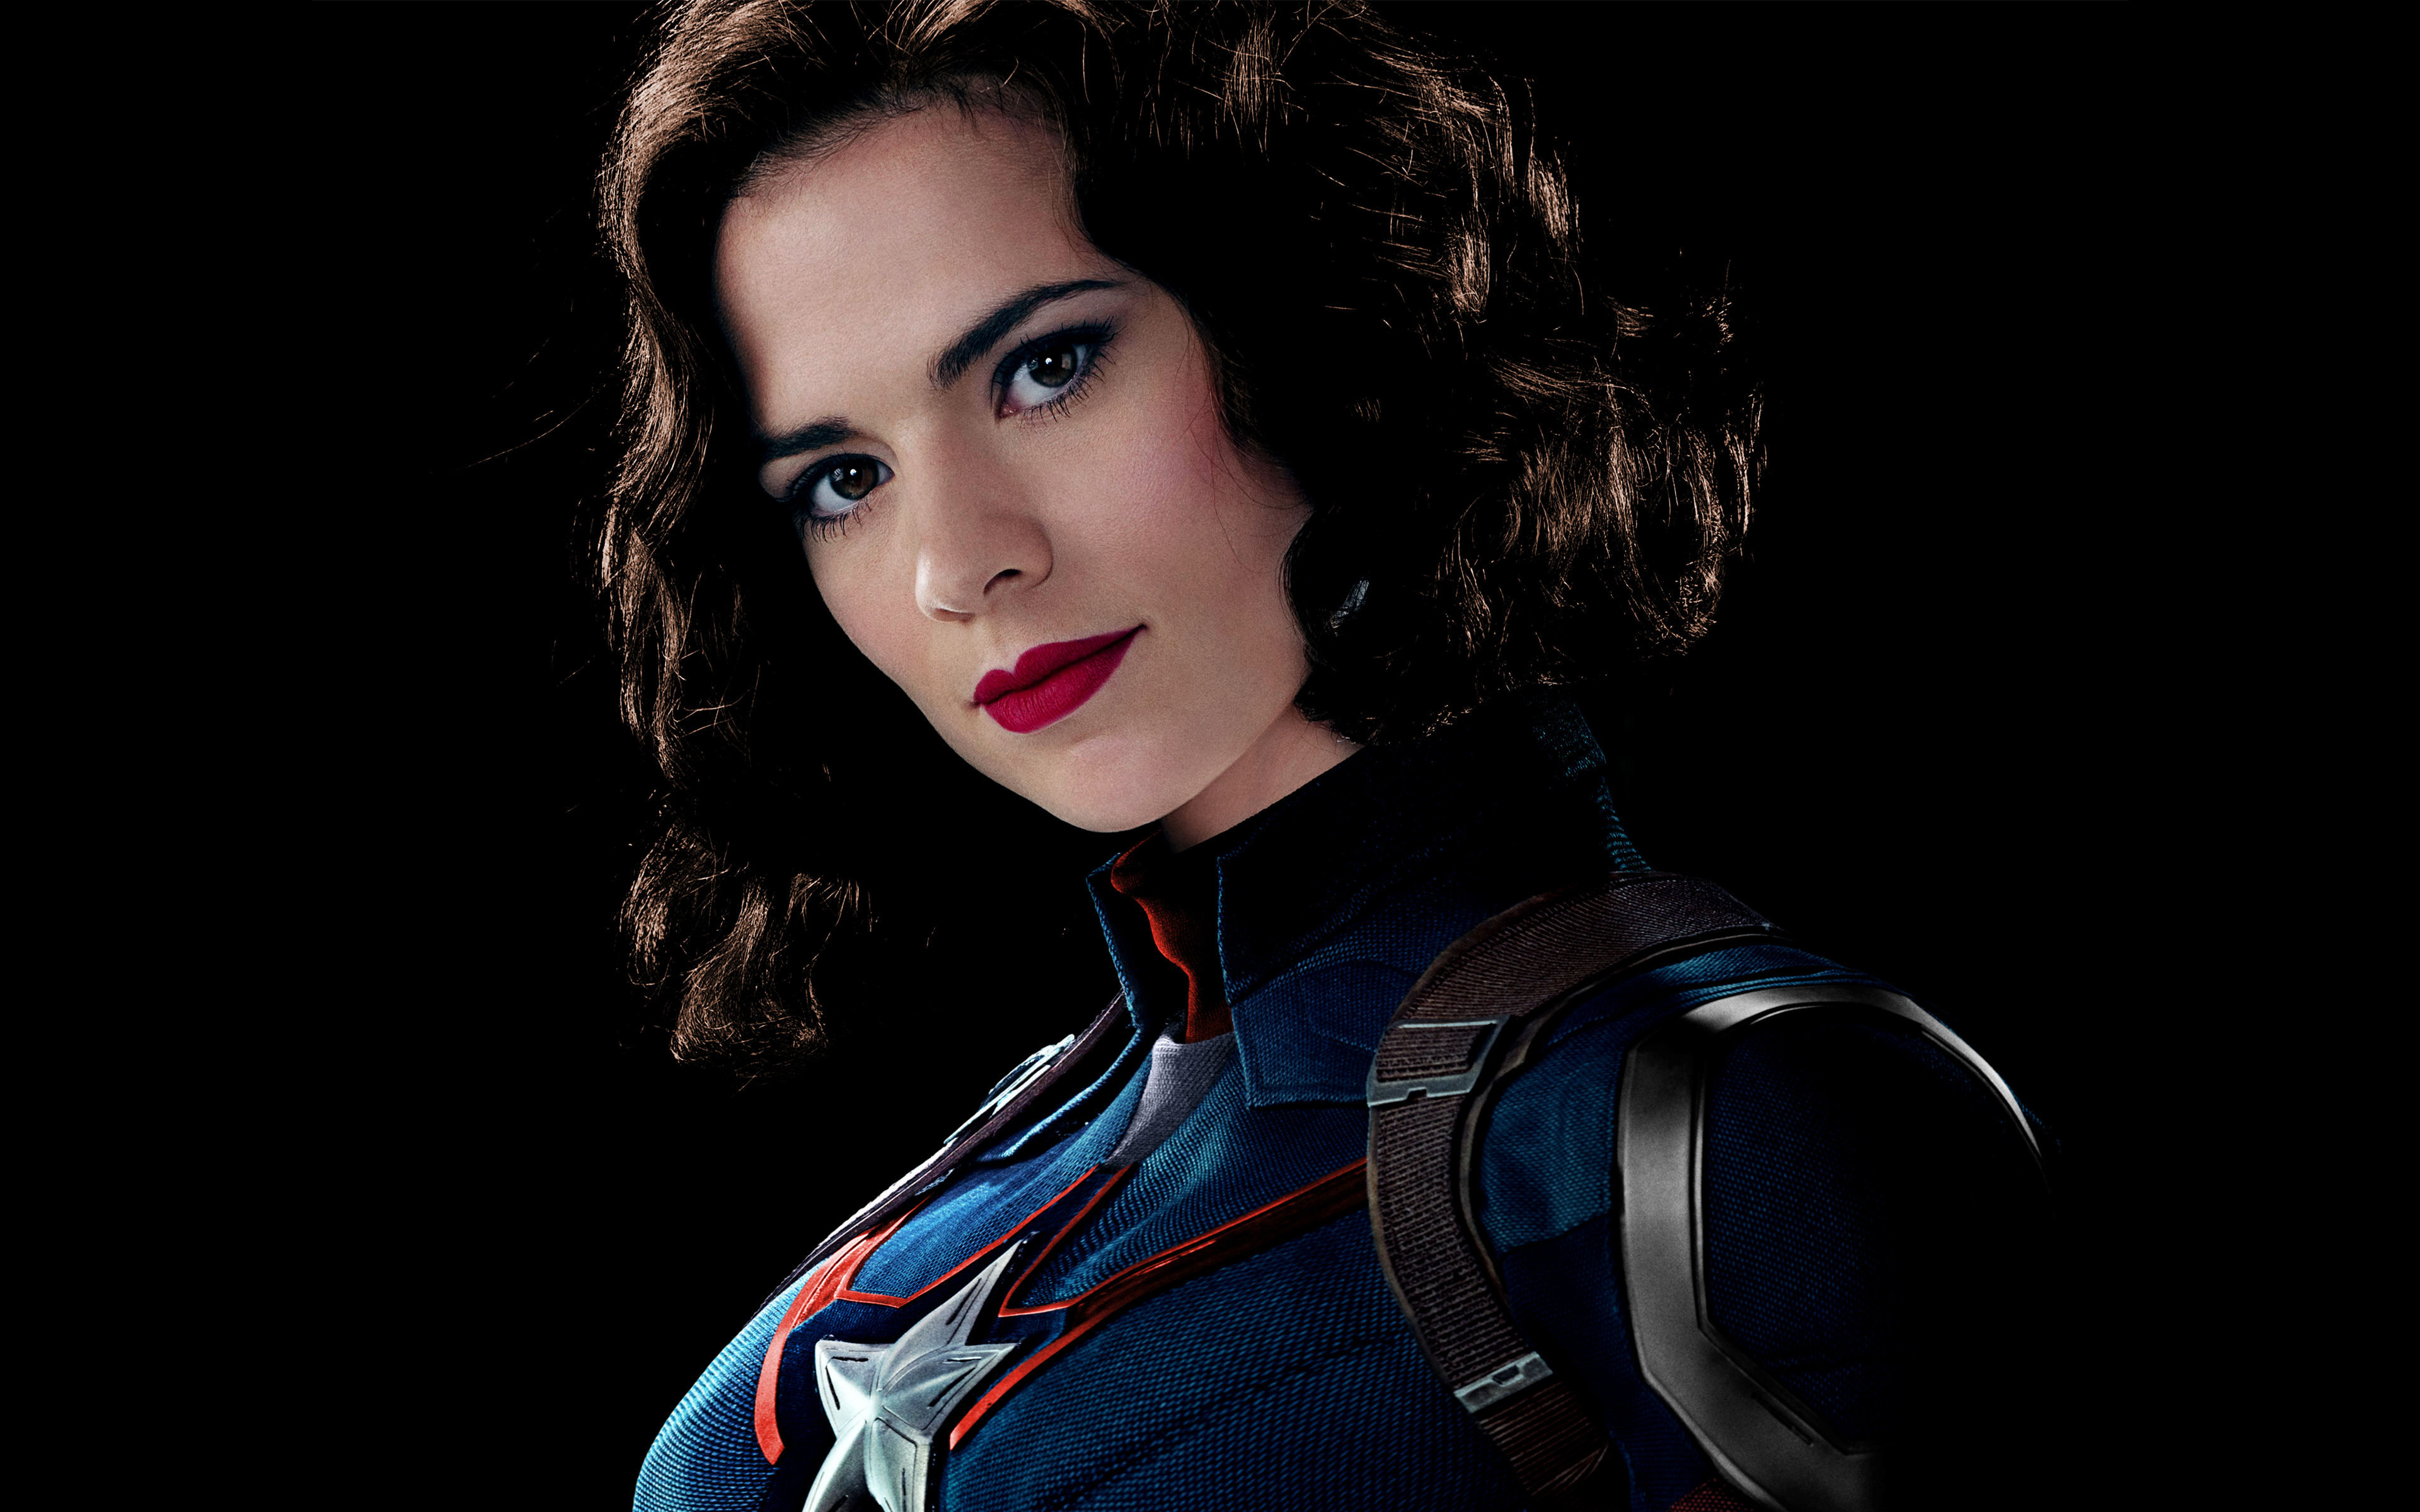 agent carter wallpaper,lip,beauty,fictional character,photography,flash photography